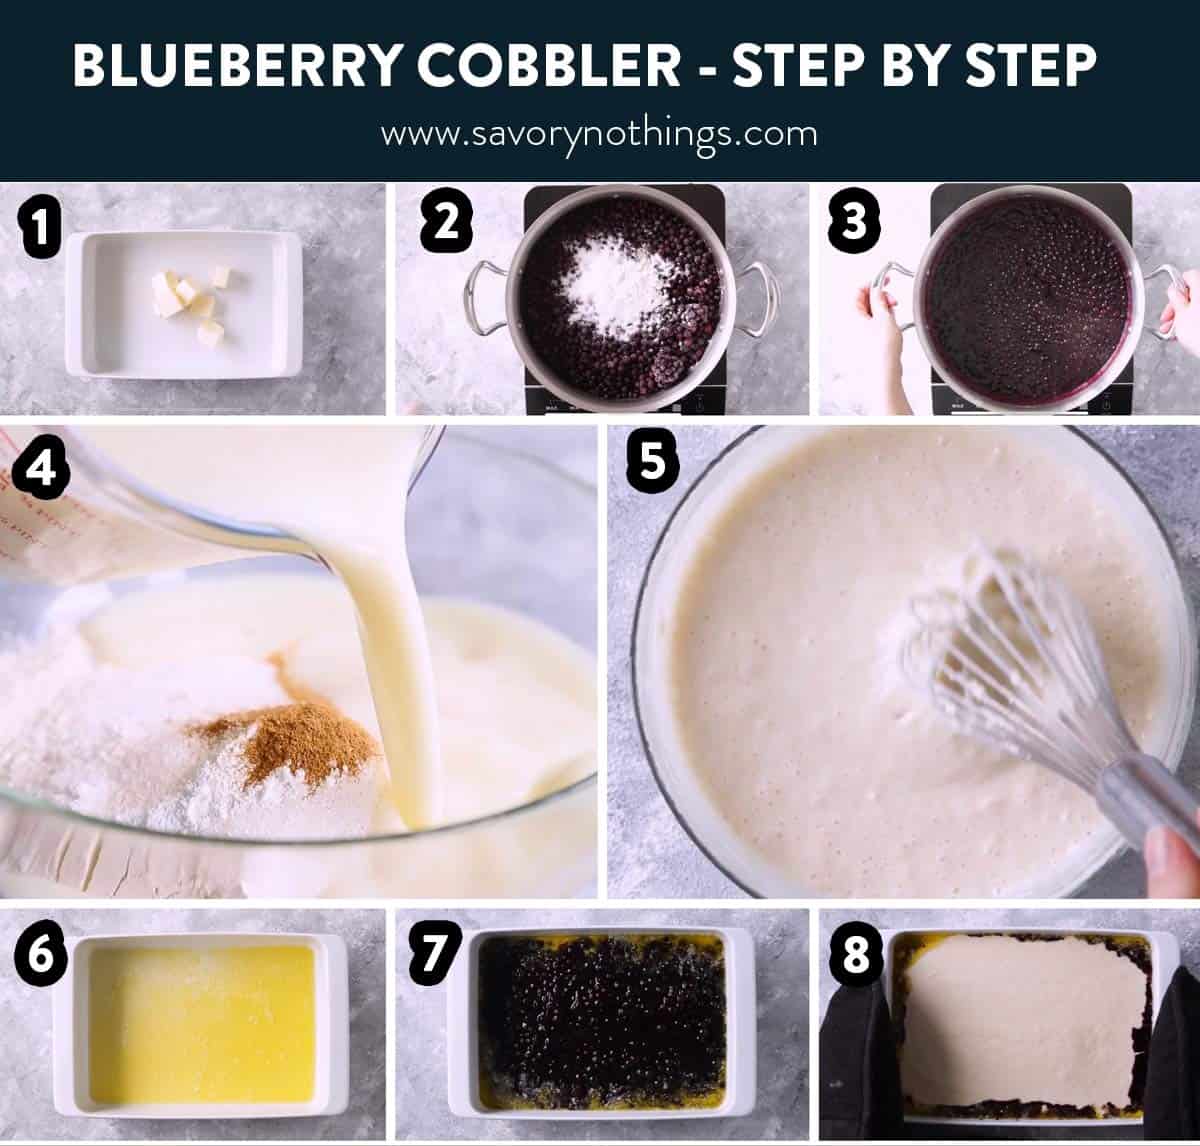 photo collage to show steps to bake blueberry cobbler